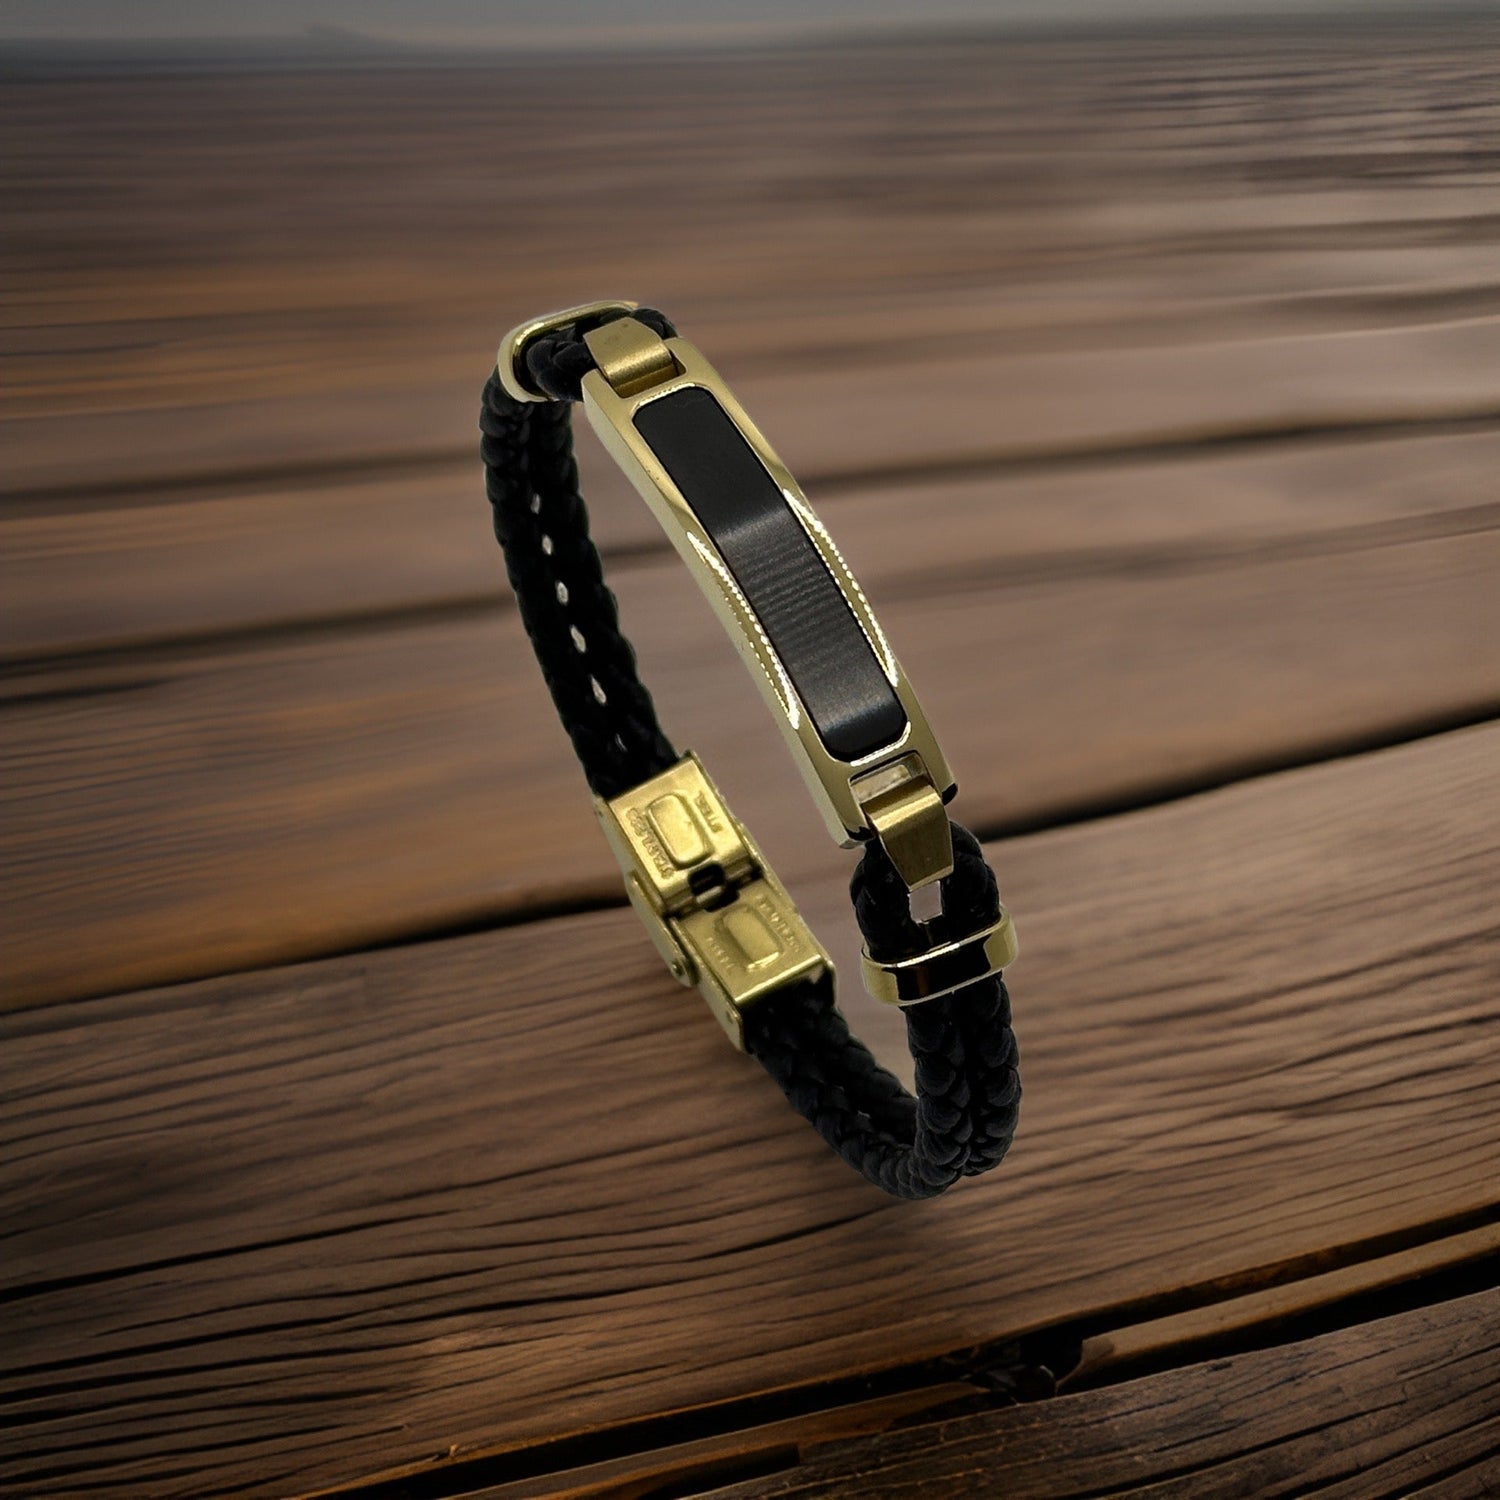 Black and gold-plated leather bracelet, woven design, rests on wooden surface.